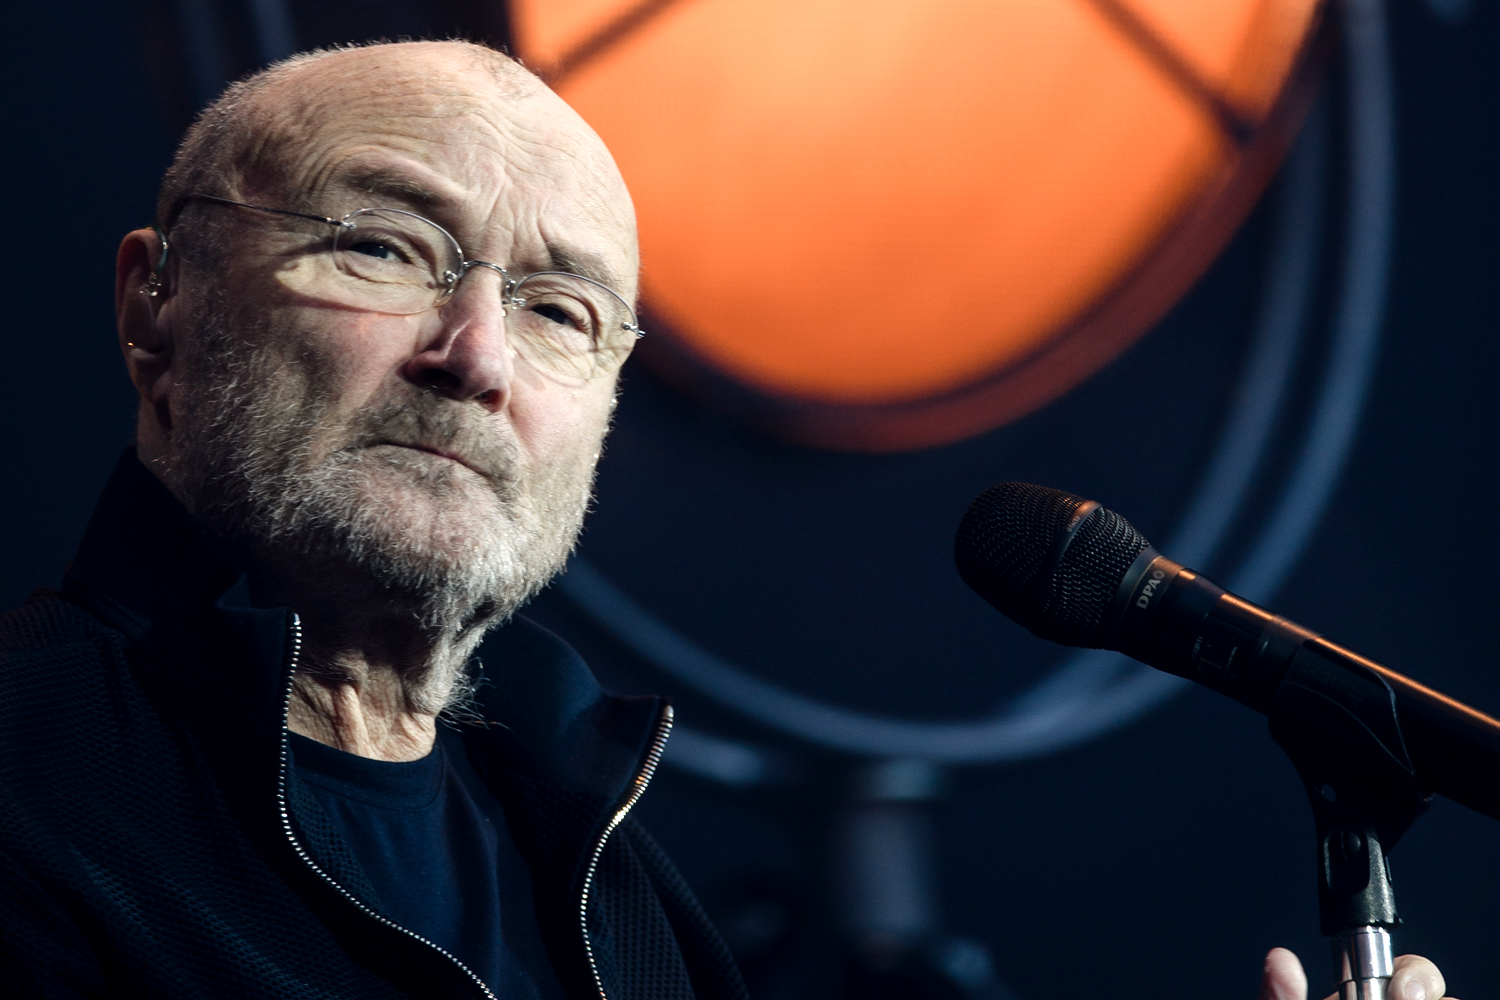 Phil Collins Biography, Net Worth, Personal Life, Career Journey